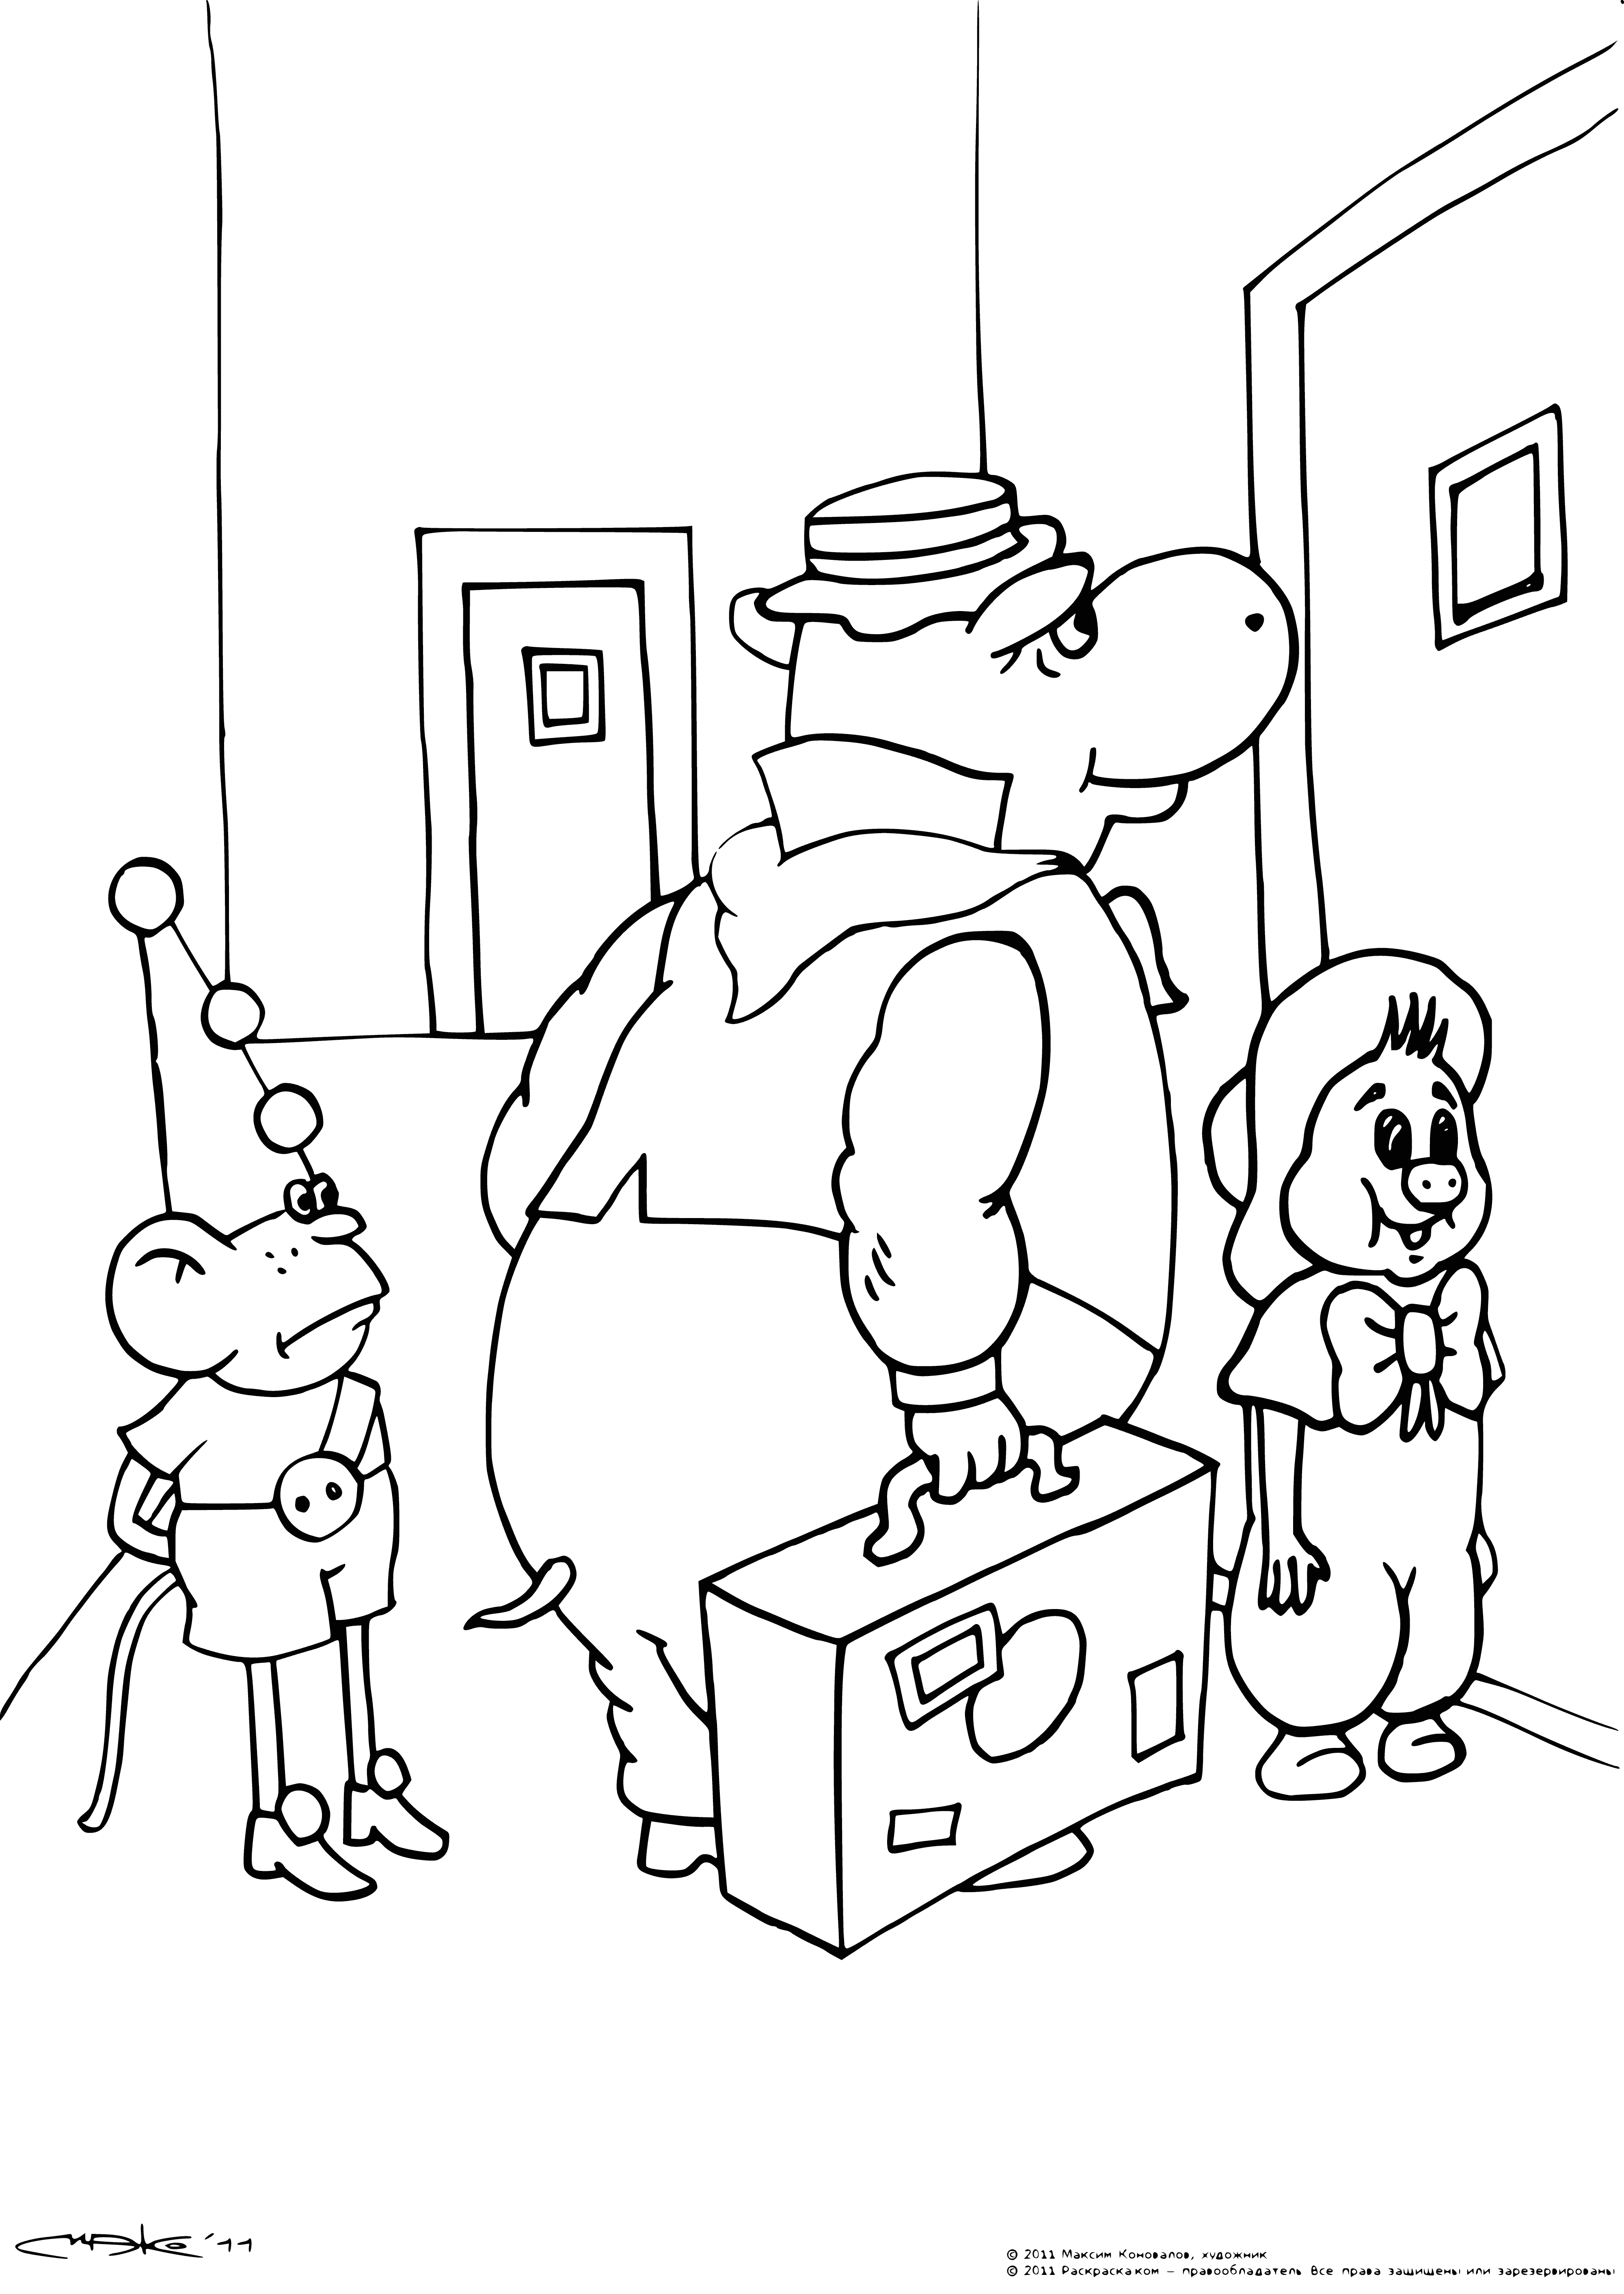 coloring page: Dog stands in front of hotel, backpack on, sign says "No pets allowed".